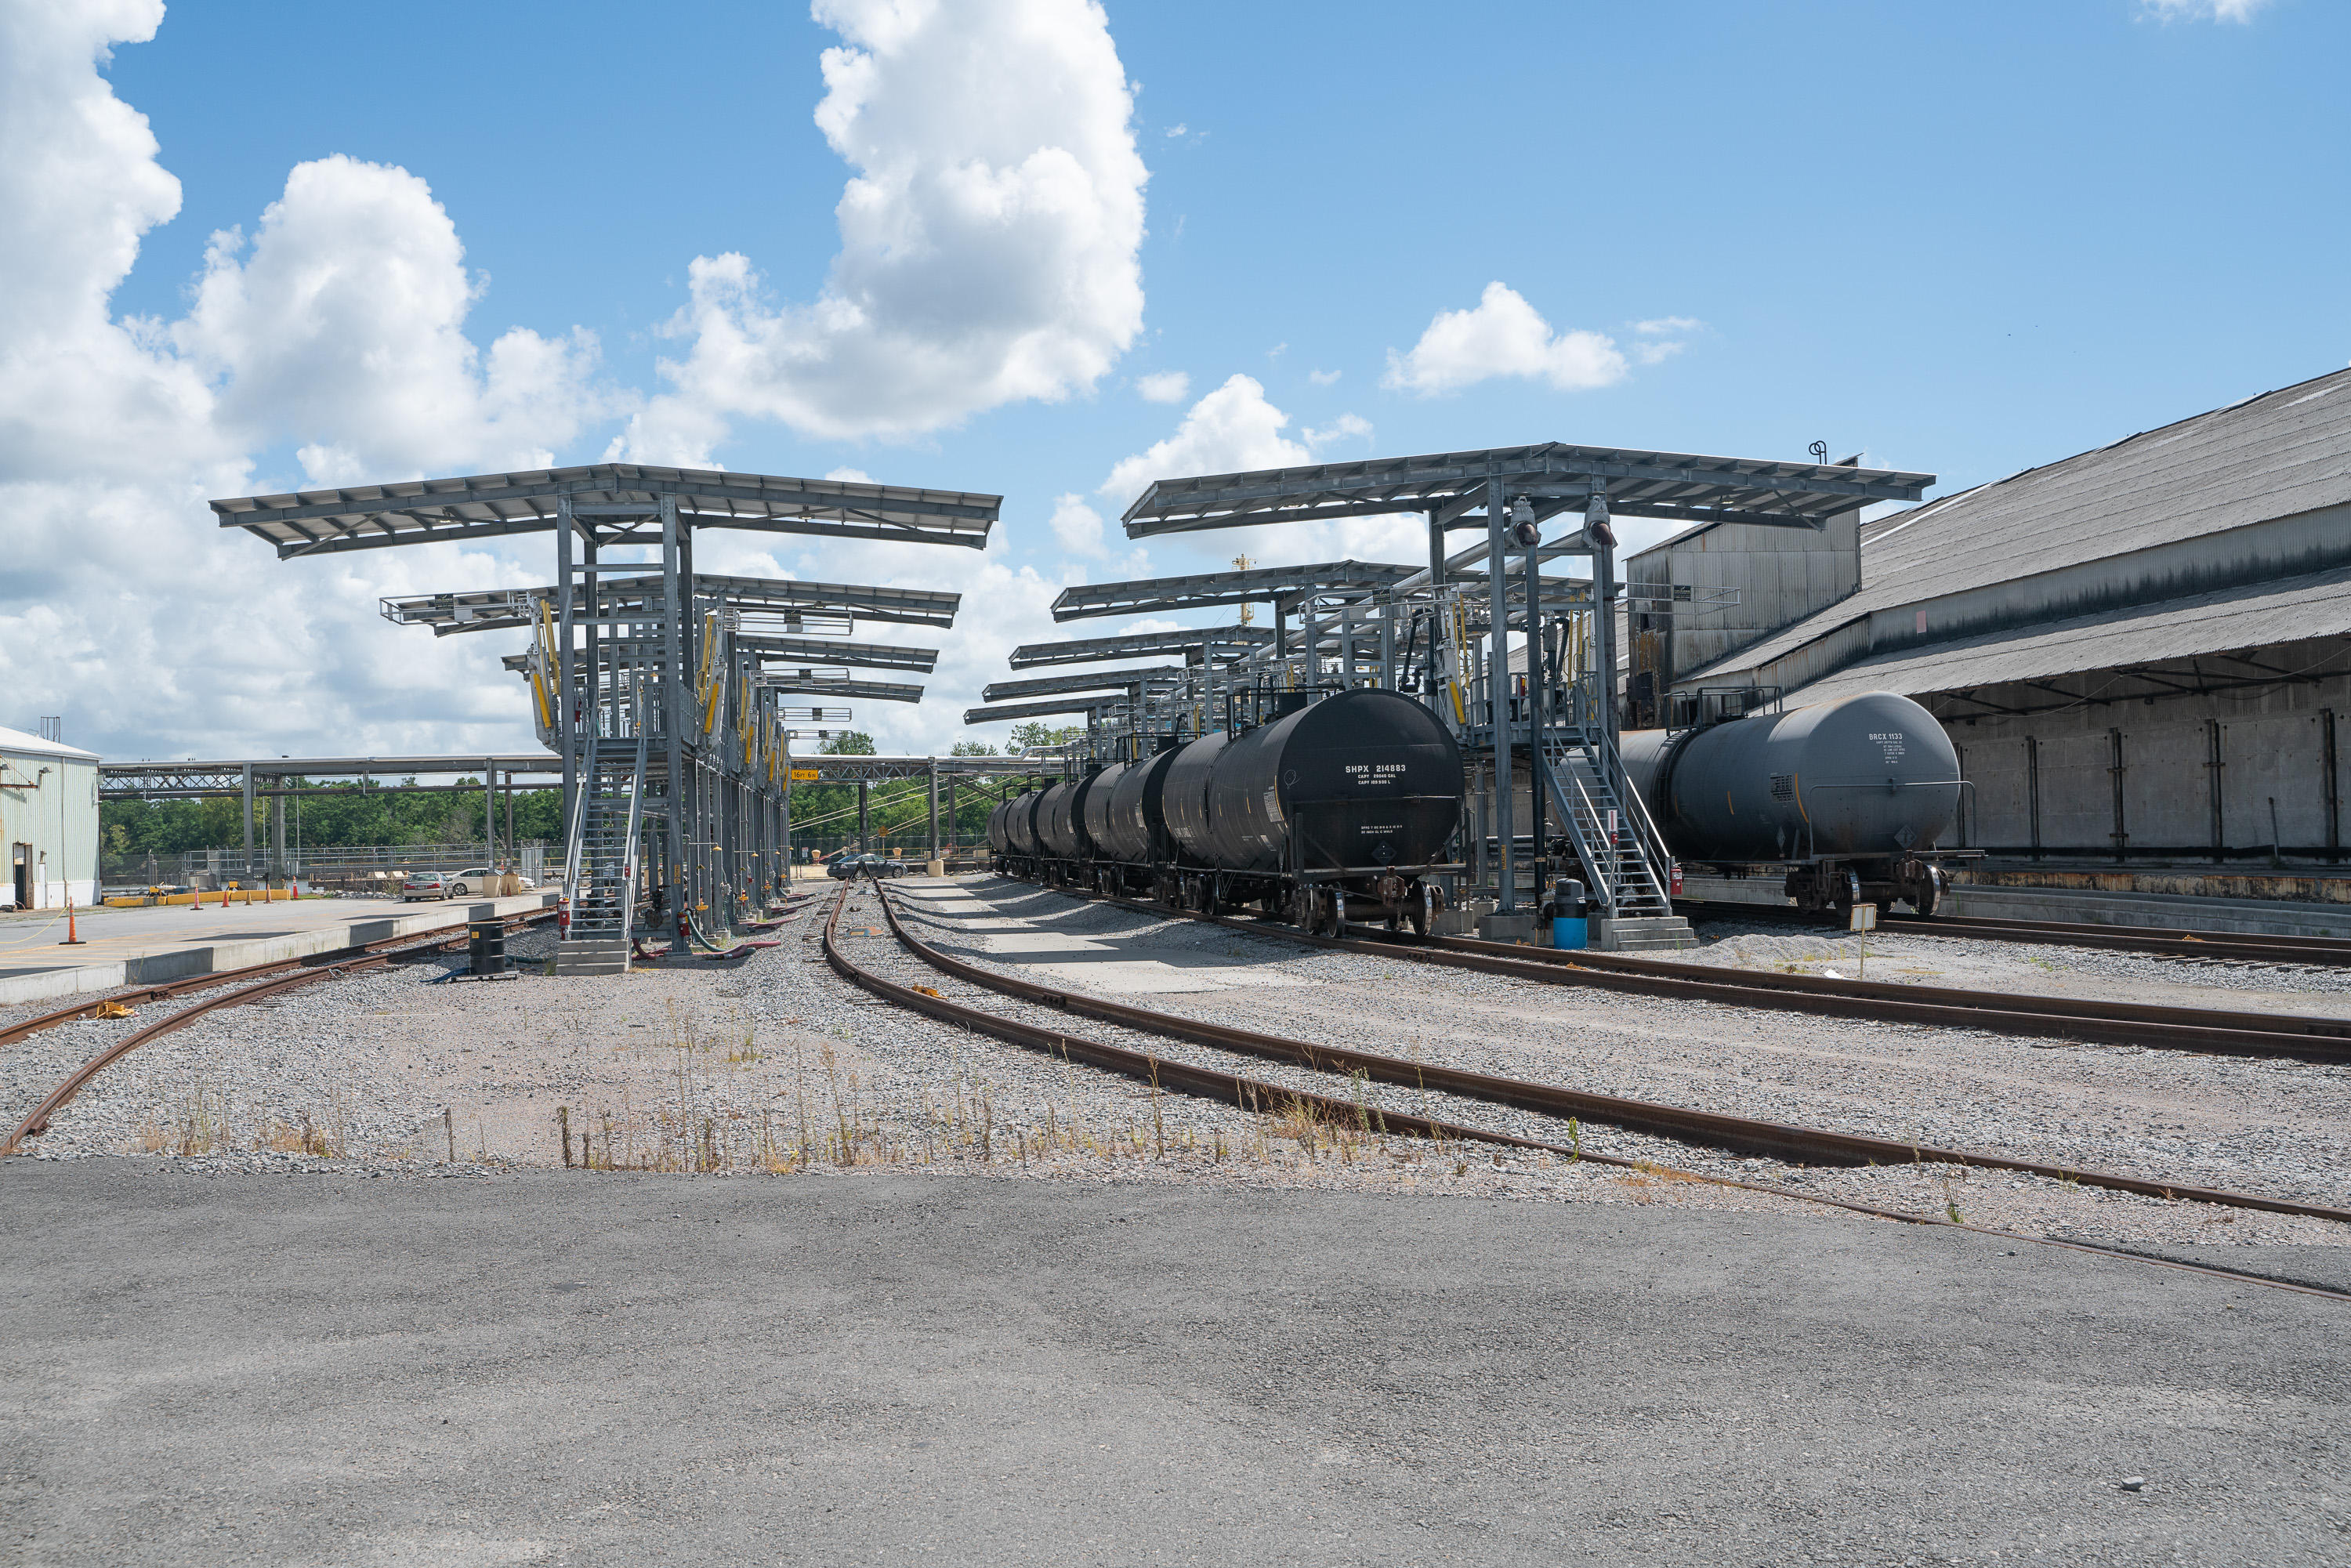 Railcars fueling at Colonial Oil Industries, Inc.